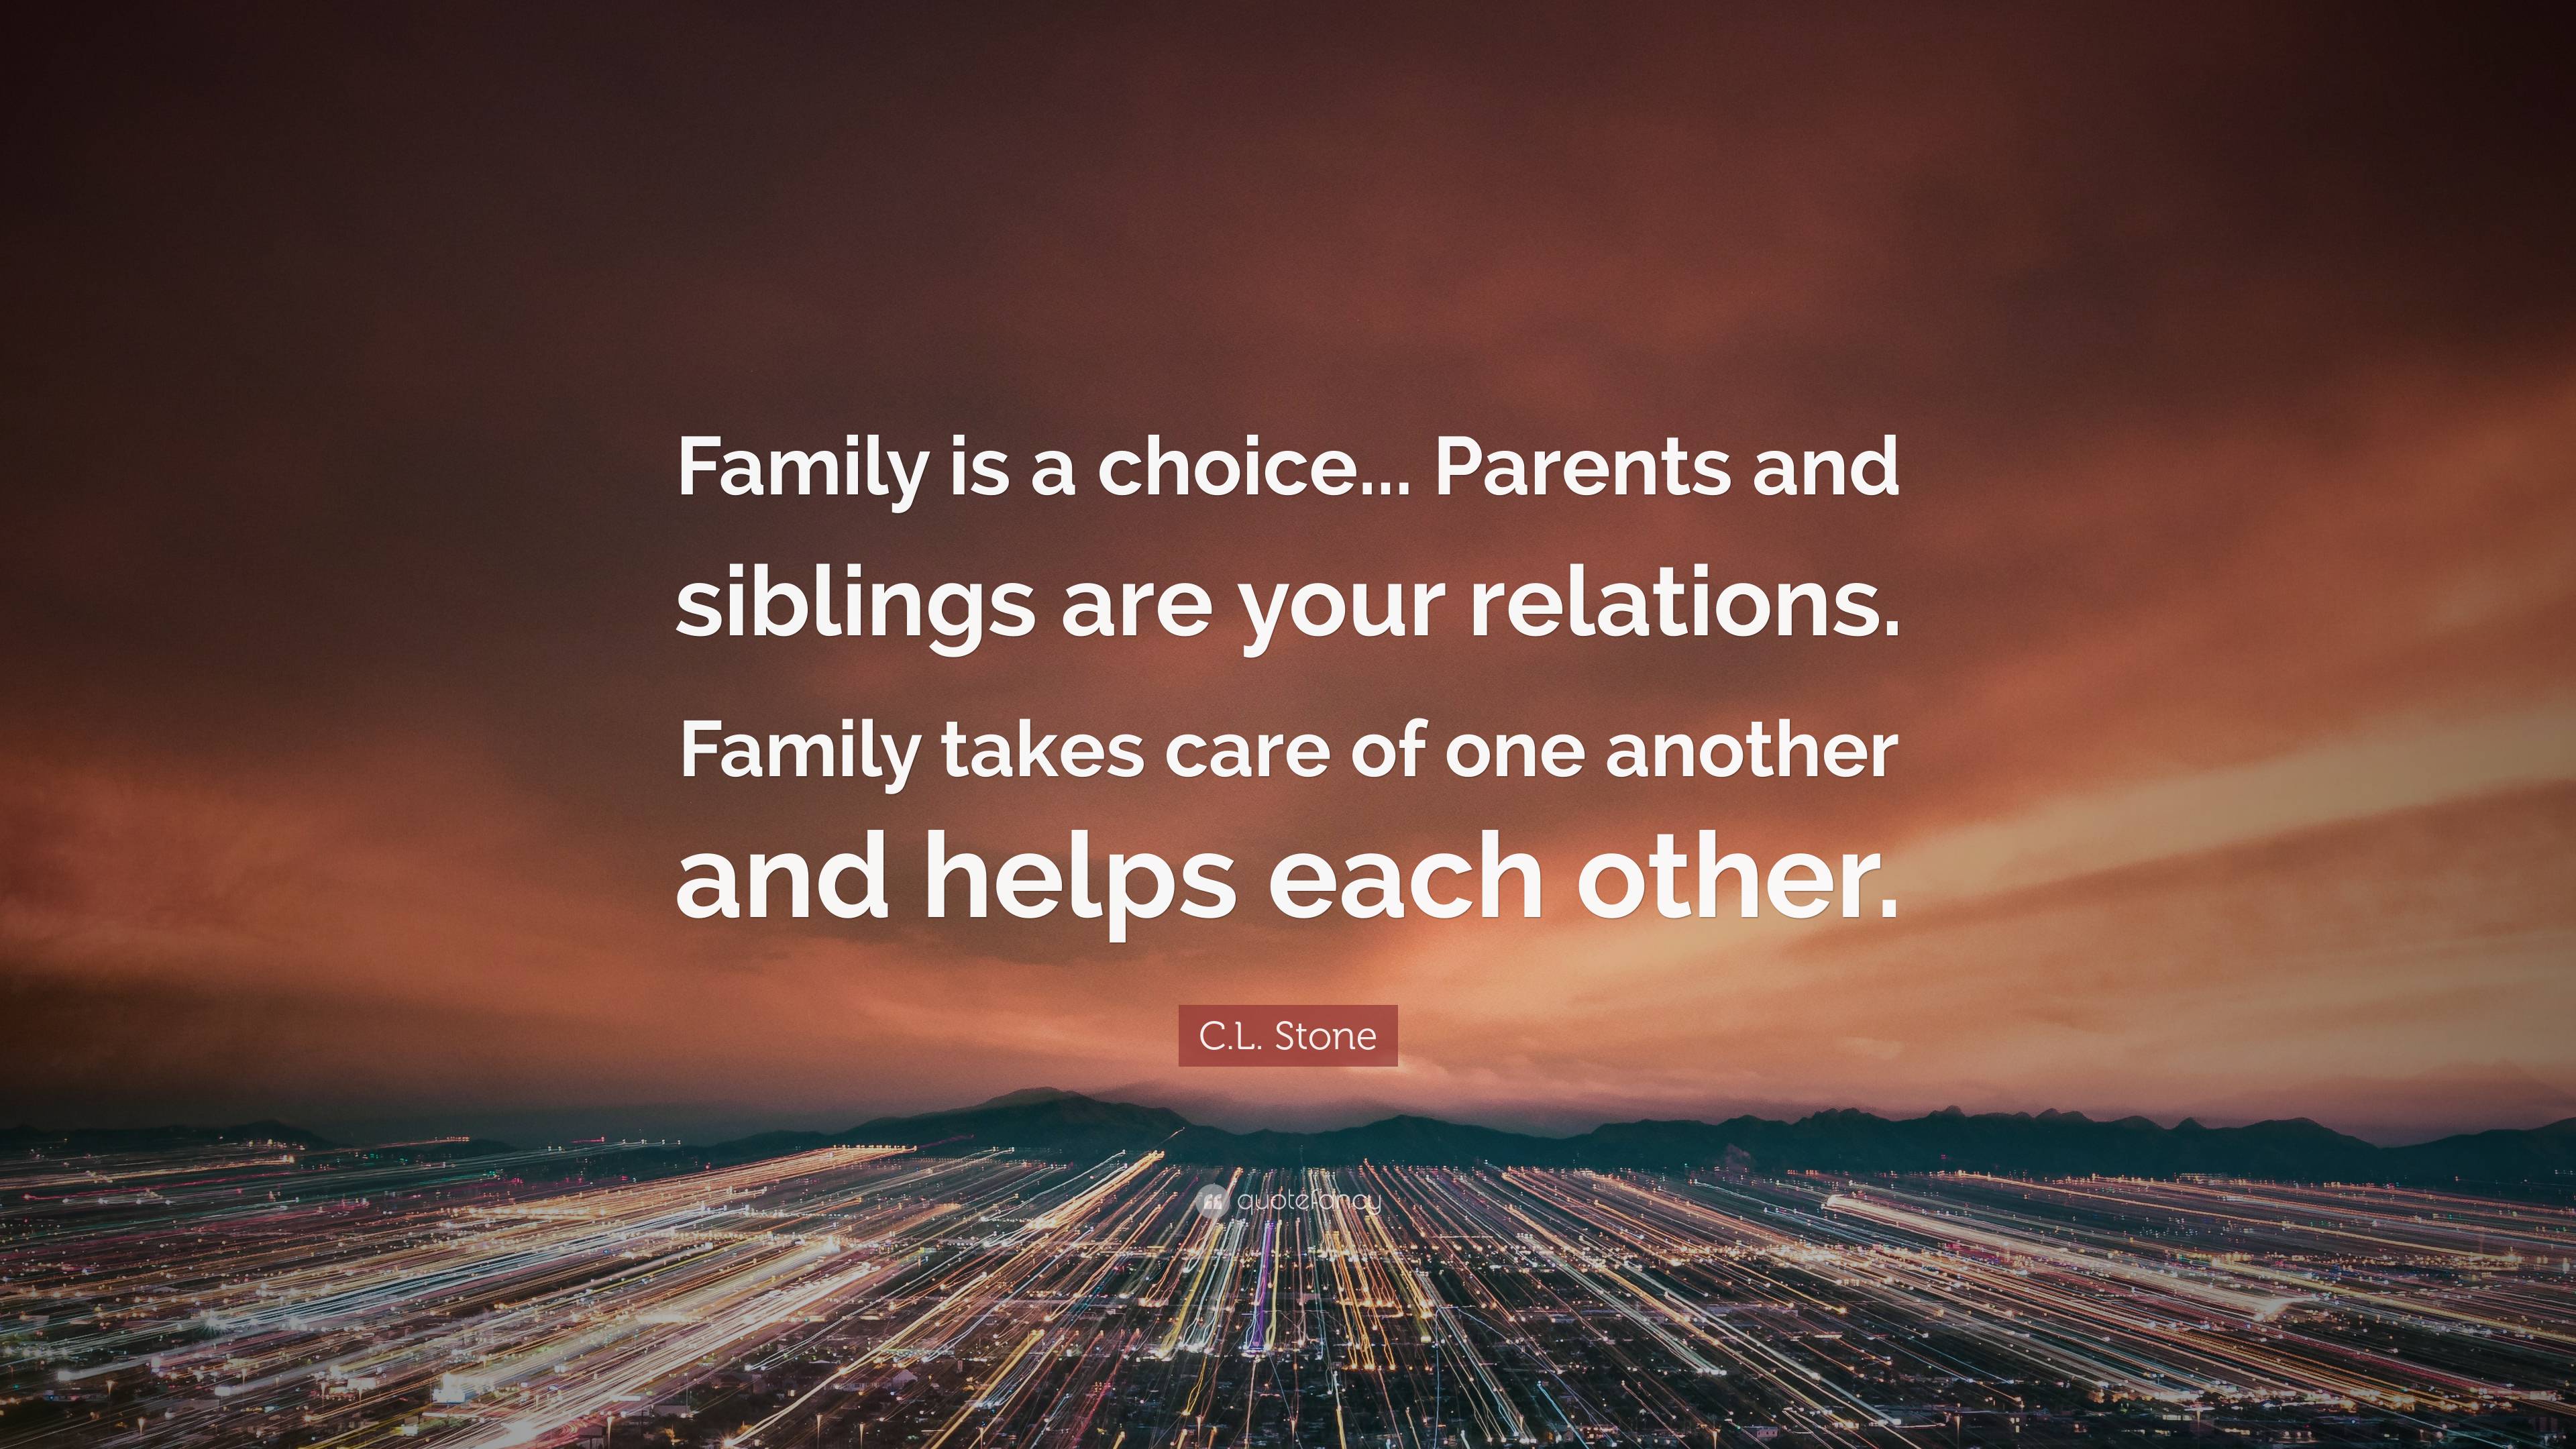 C.L. Stone Quote: “Family is a choice Parents and siblings are your  relations. Family takes care